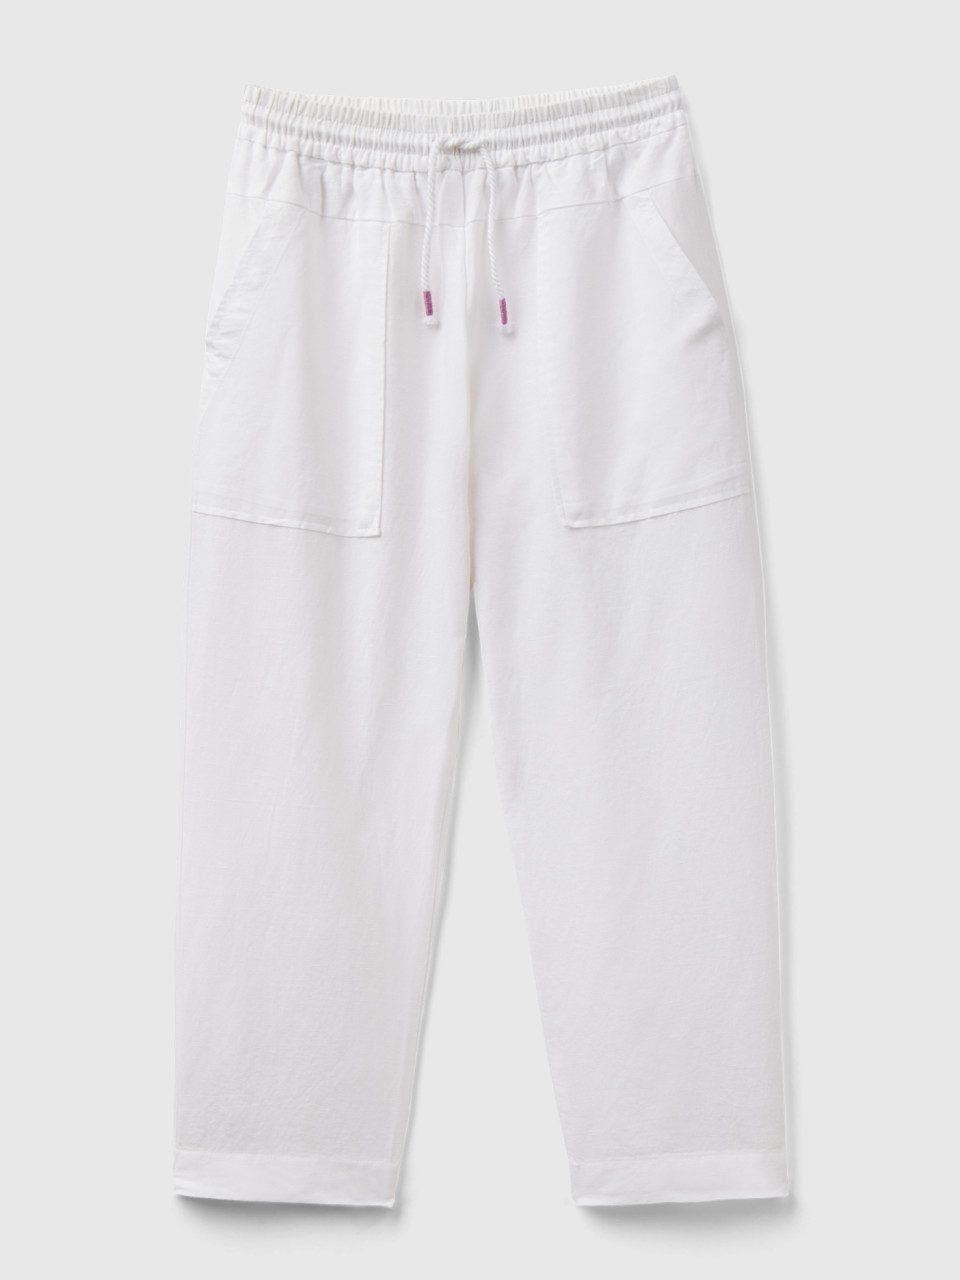 Benetton, Trousers In Linen Blend With Drawstring, White, Kids